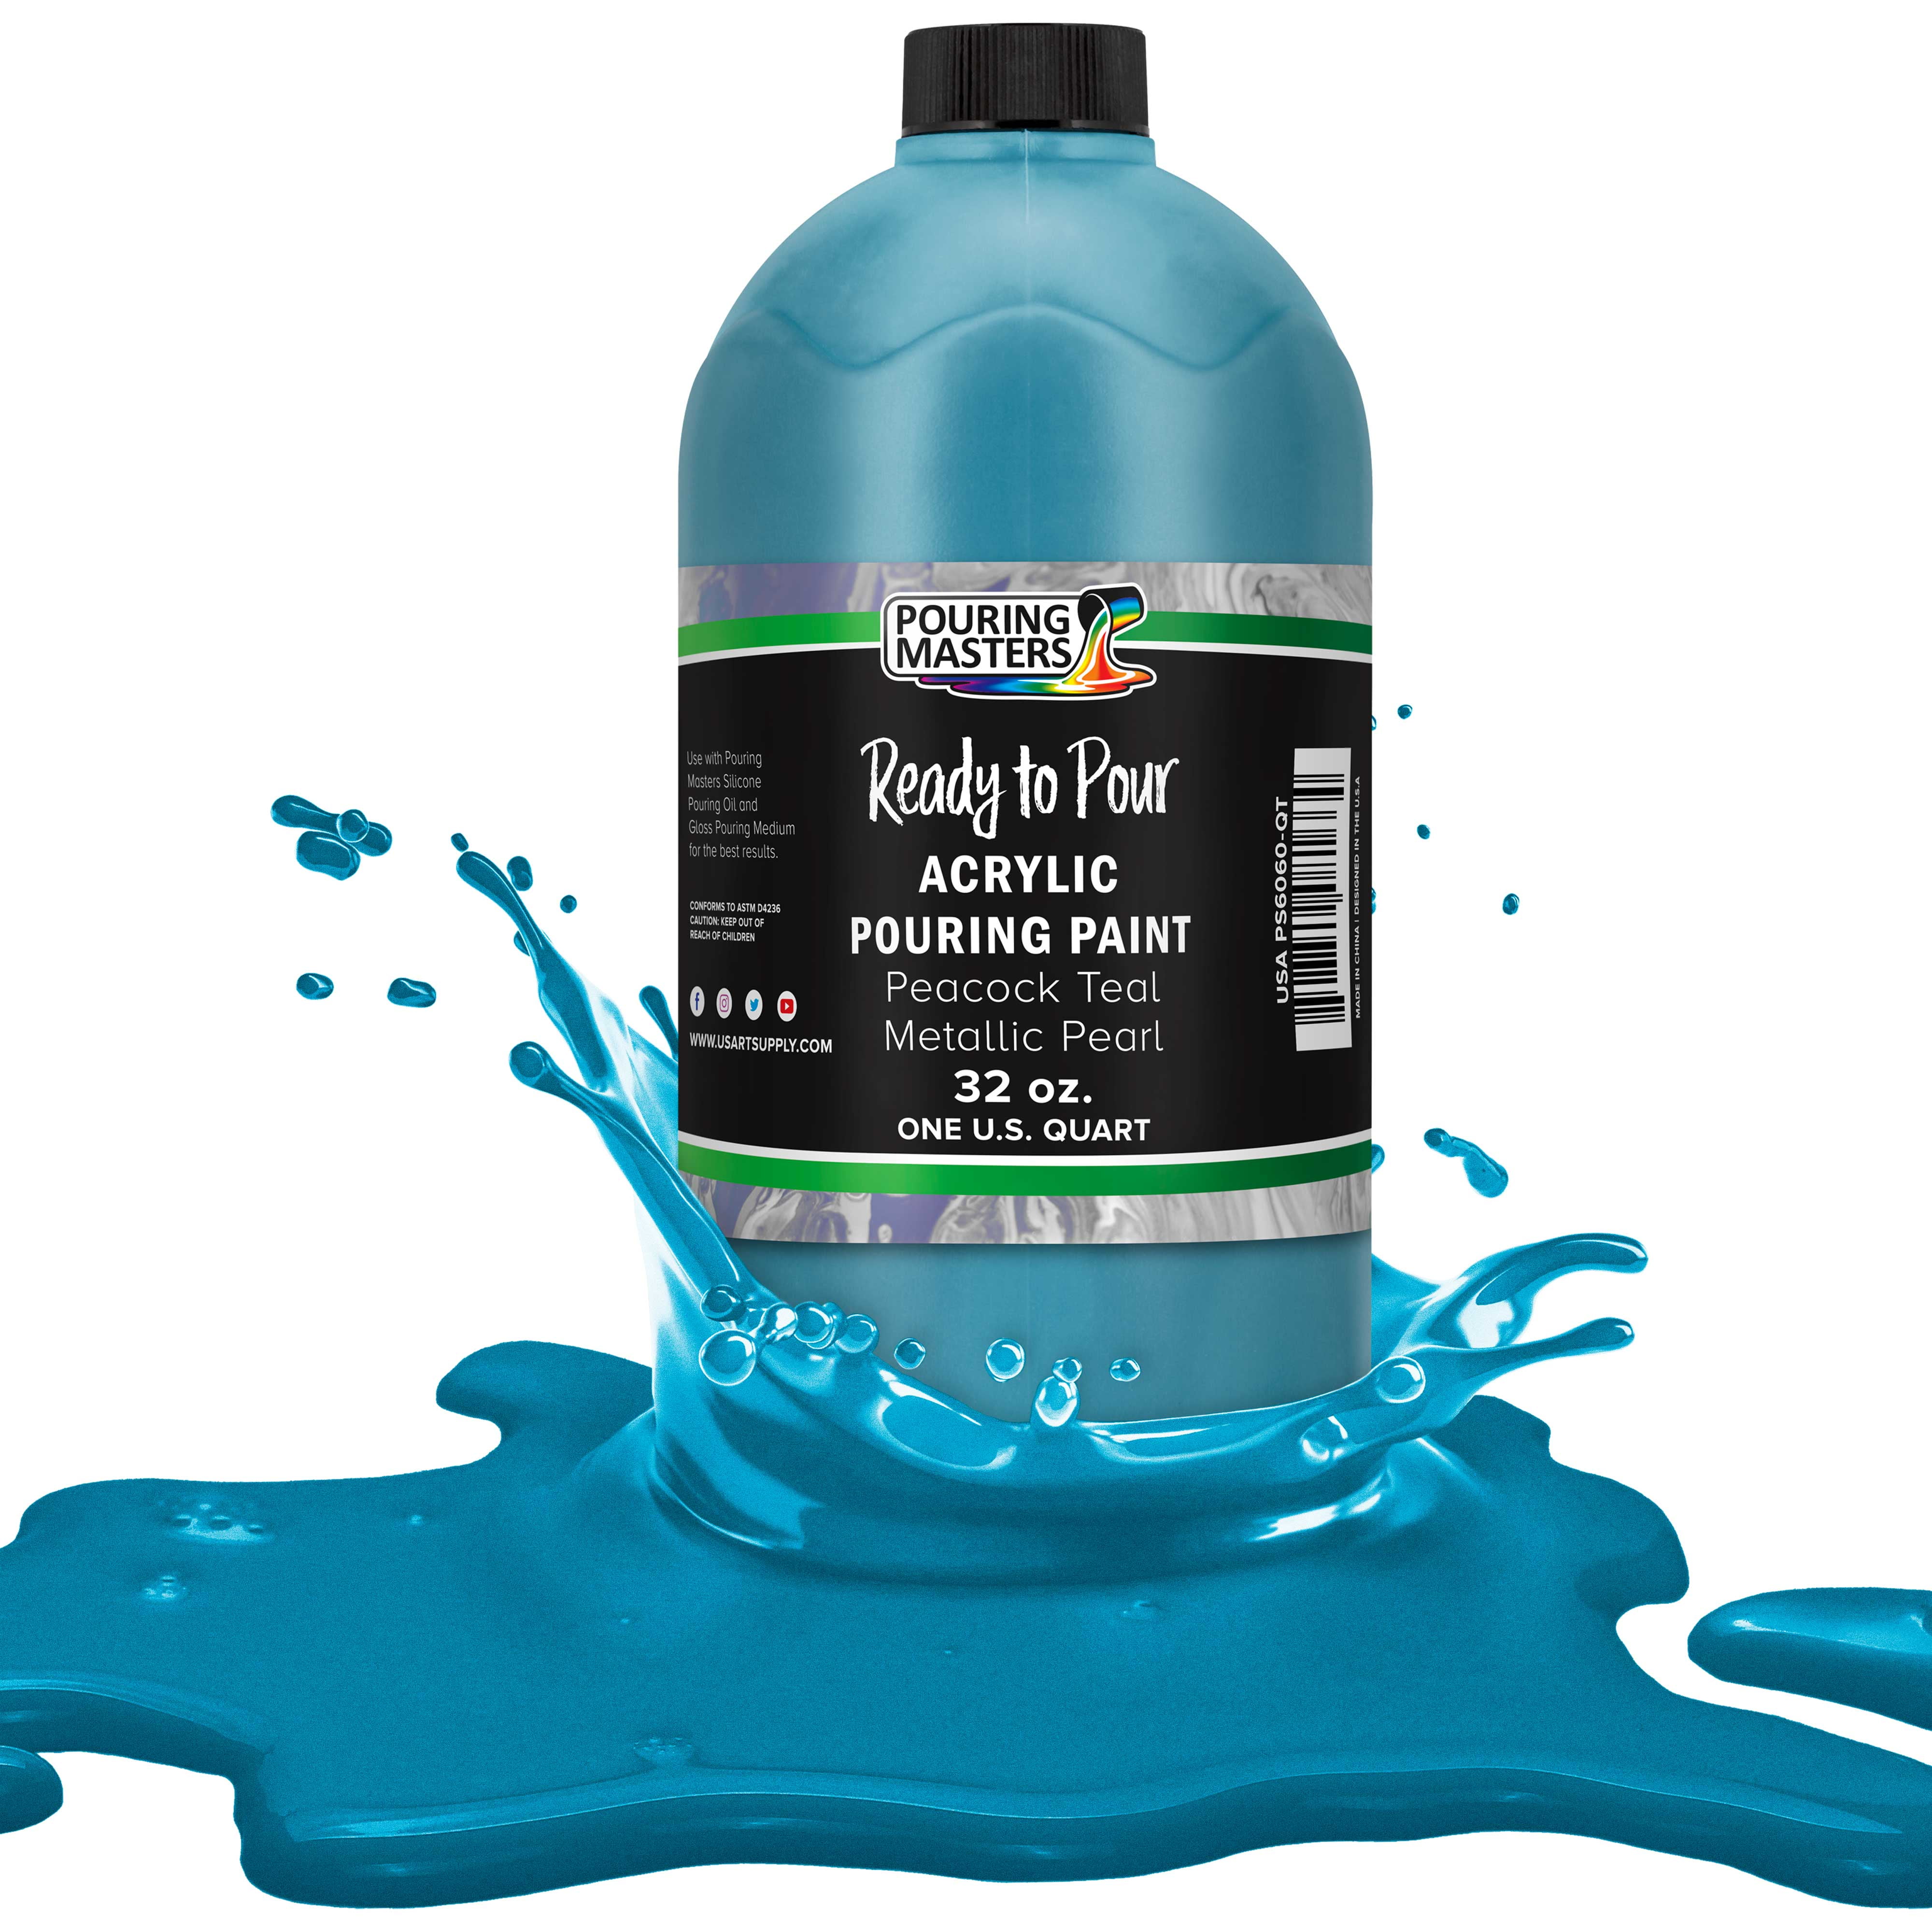 Pouring Masters Peacock Teal Metallic Pearl Acrylic Ready to Pour Pouring  Paint – Premium 32-Ounce Pre-Mixed Water-Based 